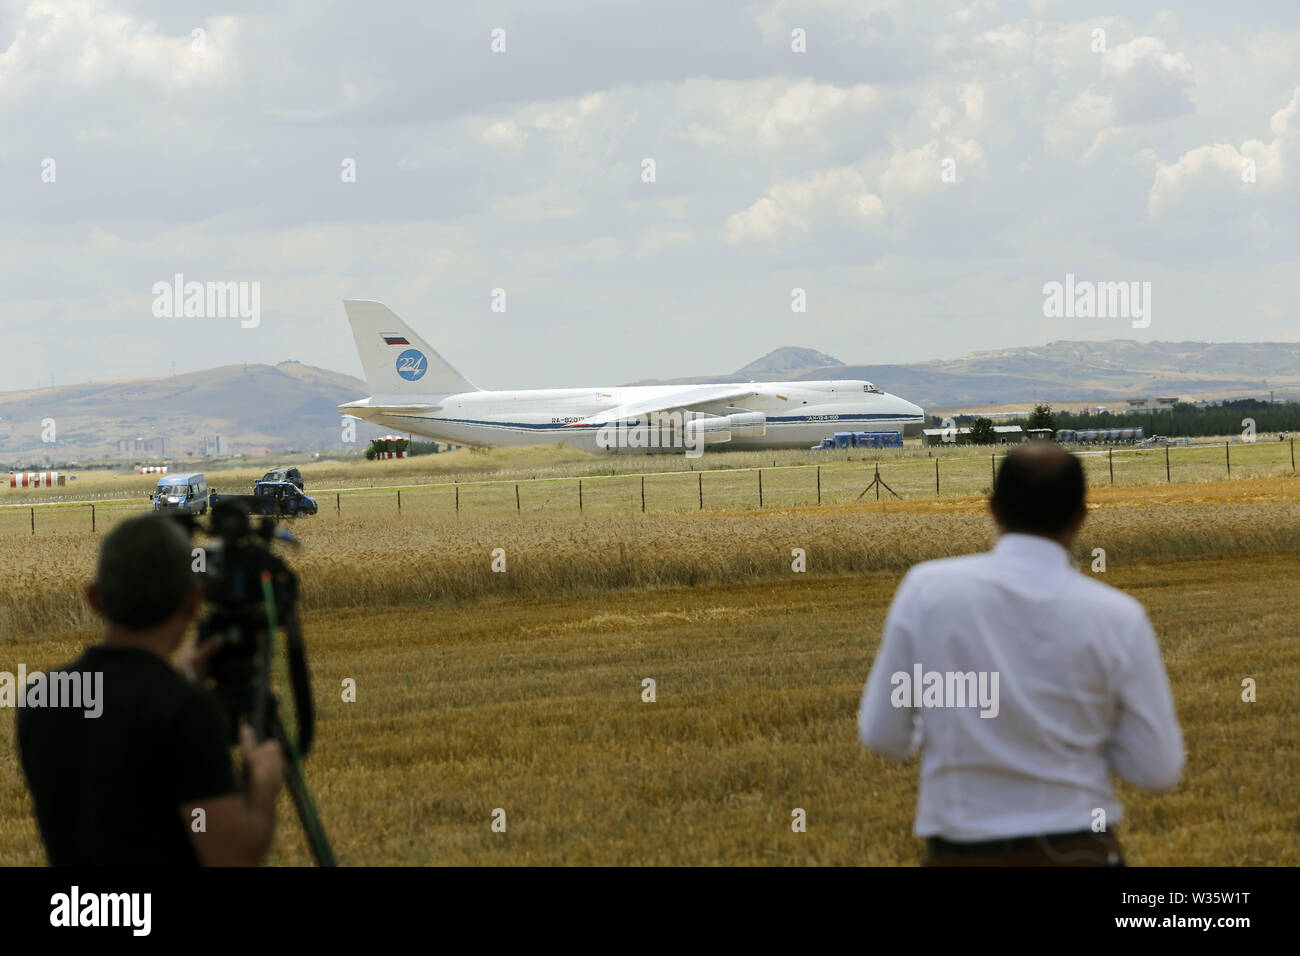 Ankara, Turkey. 12th July, 2019. A Russian Antonov military cargo plane,  carrying parts of the S-400 missile defense system from Russia, lands at  the Murted Air Base in Ankara, Turkey, on July